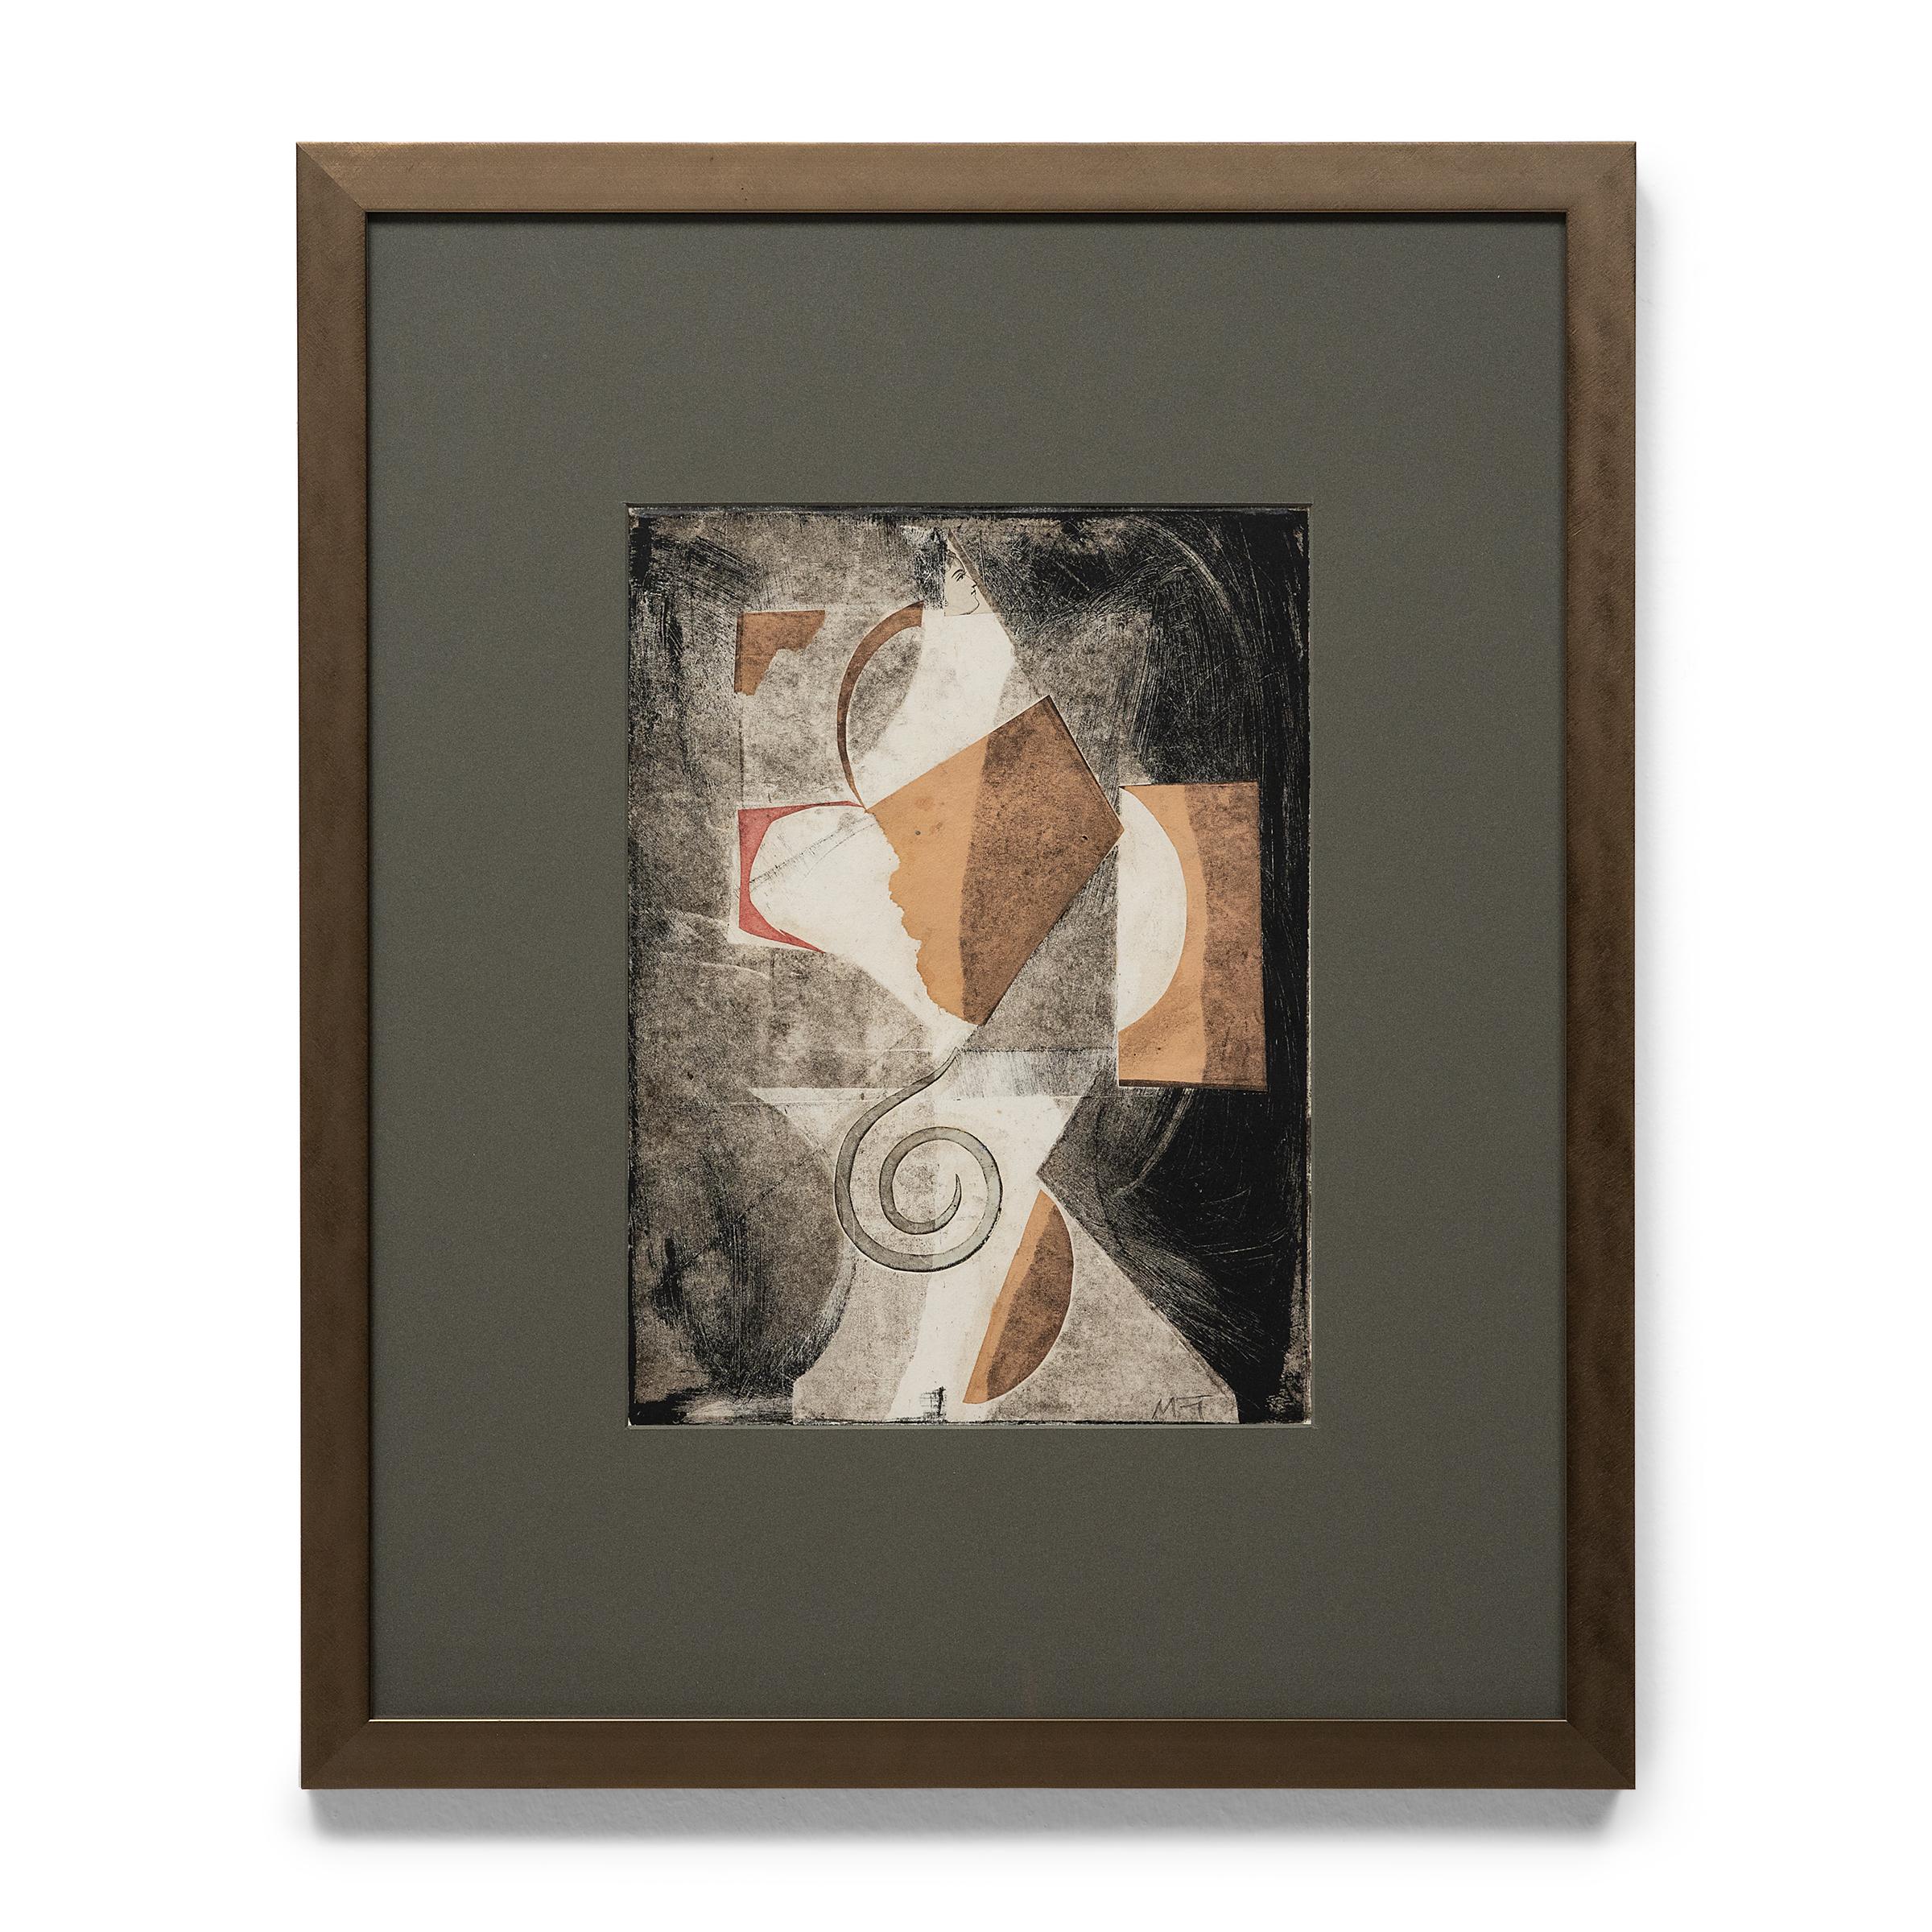 Michael Thompson Photographer Abstract Print - "Parts of Another, " Mixed Media Collage